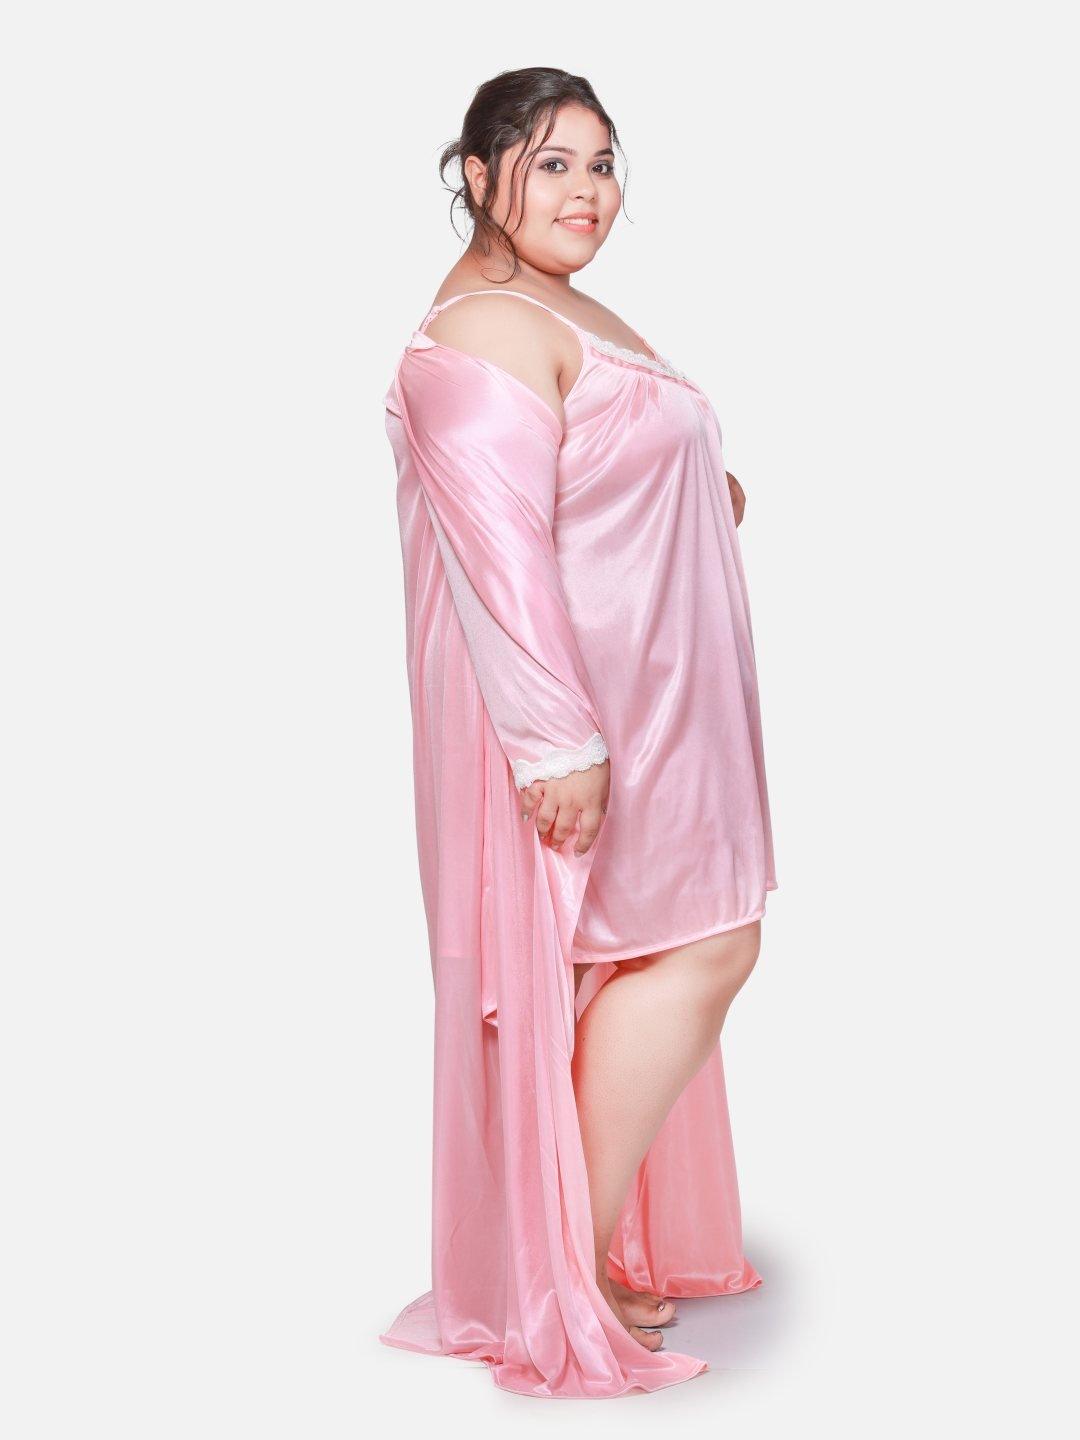 Plus Size Hot Two Piece Light Pink Babydoll Night Dress for Women 302Hl